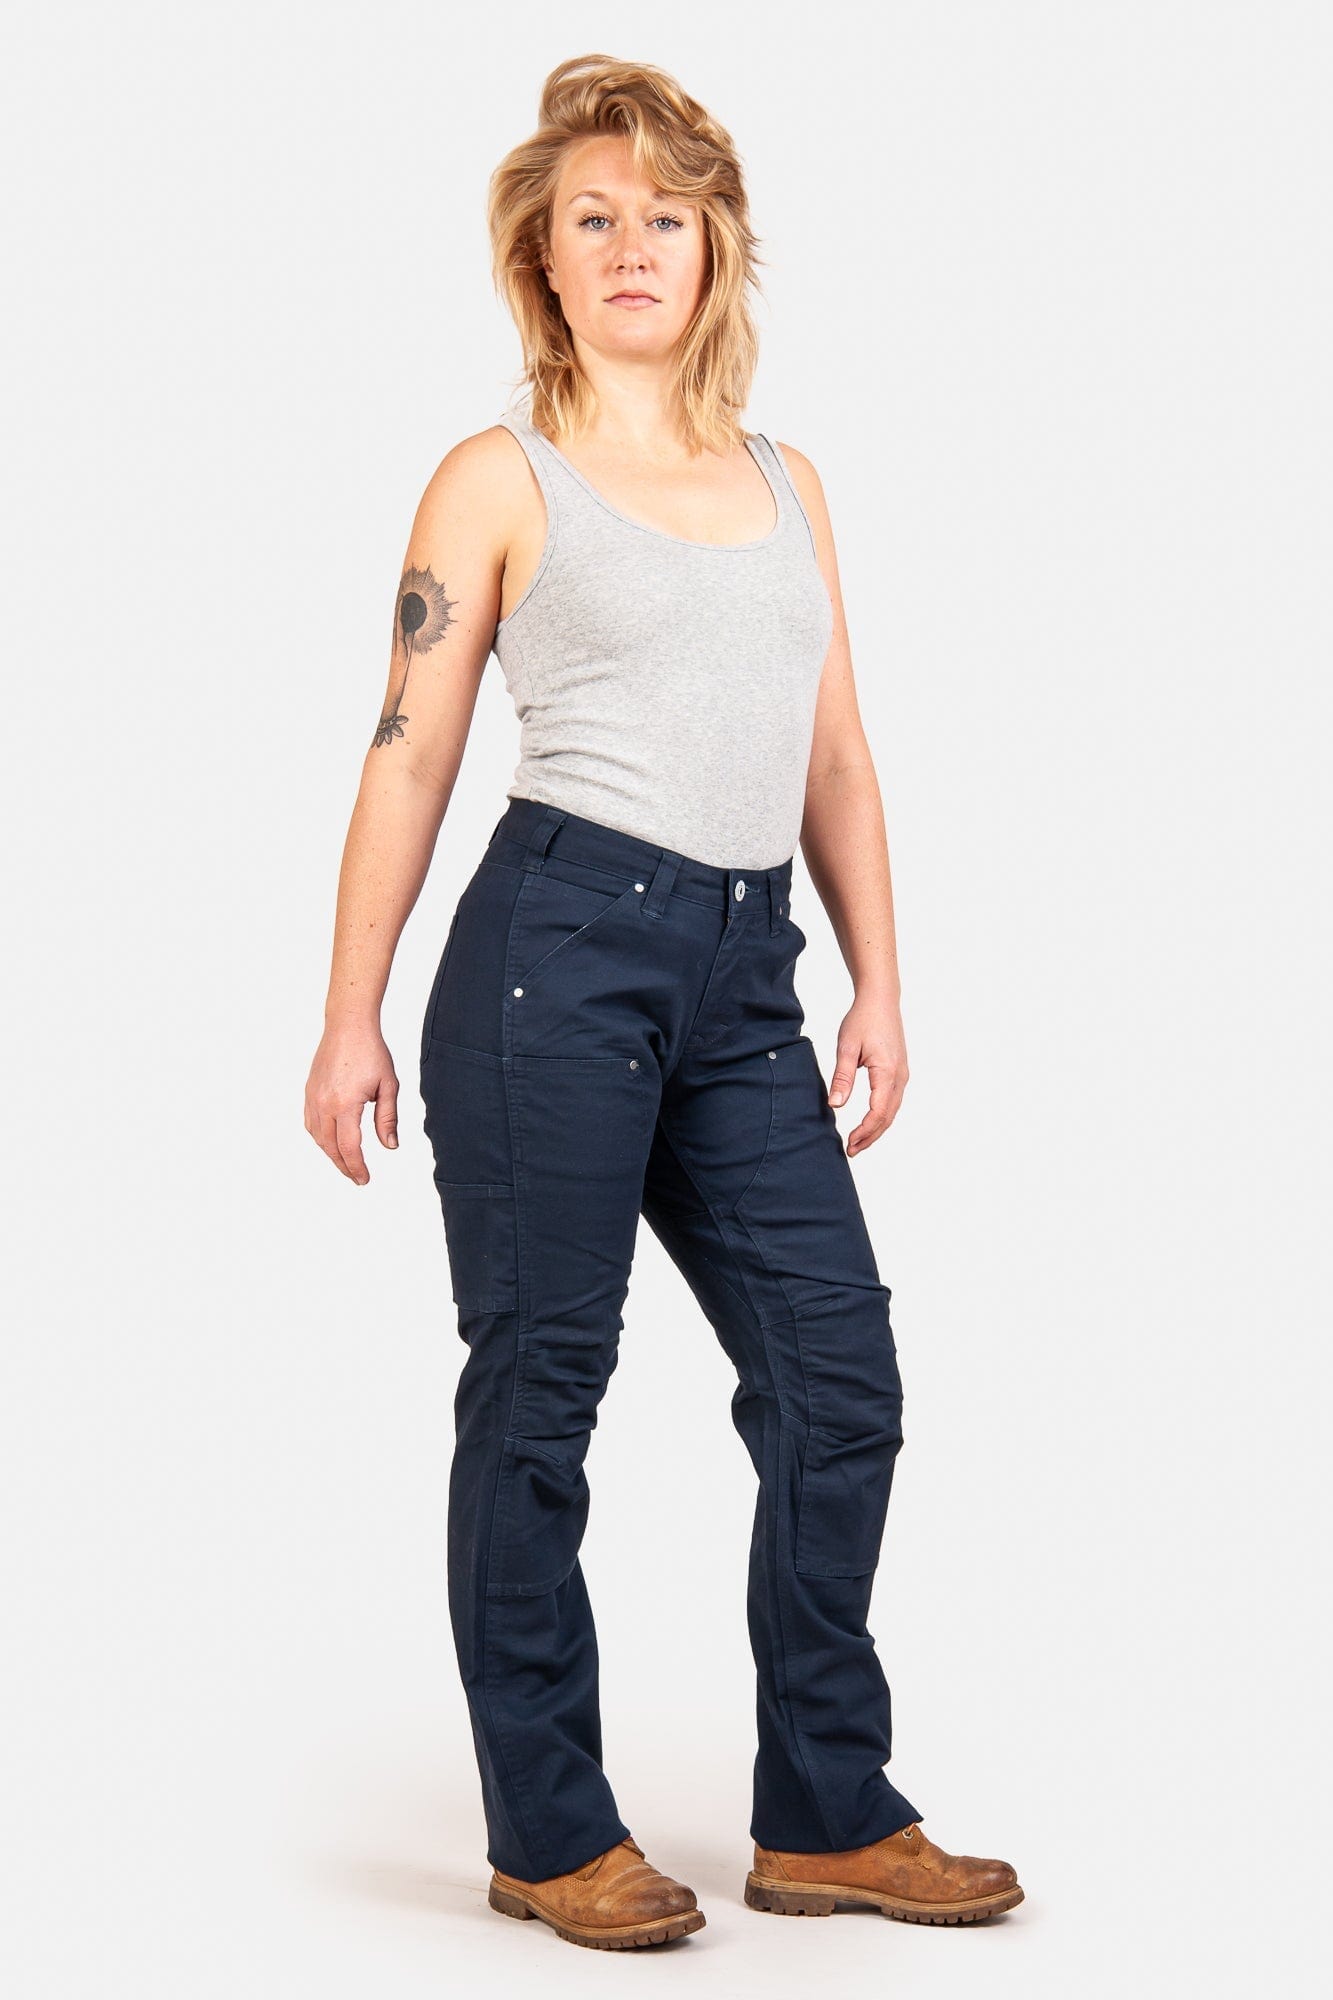 Dovetail Workwear Anna Taskpant Cargo Pants for Women, Relaxed Fit